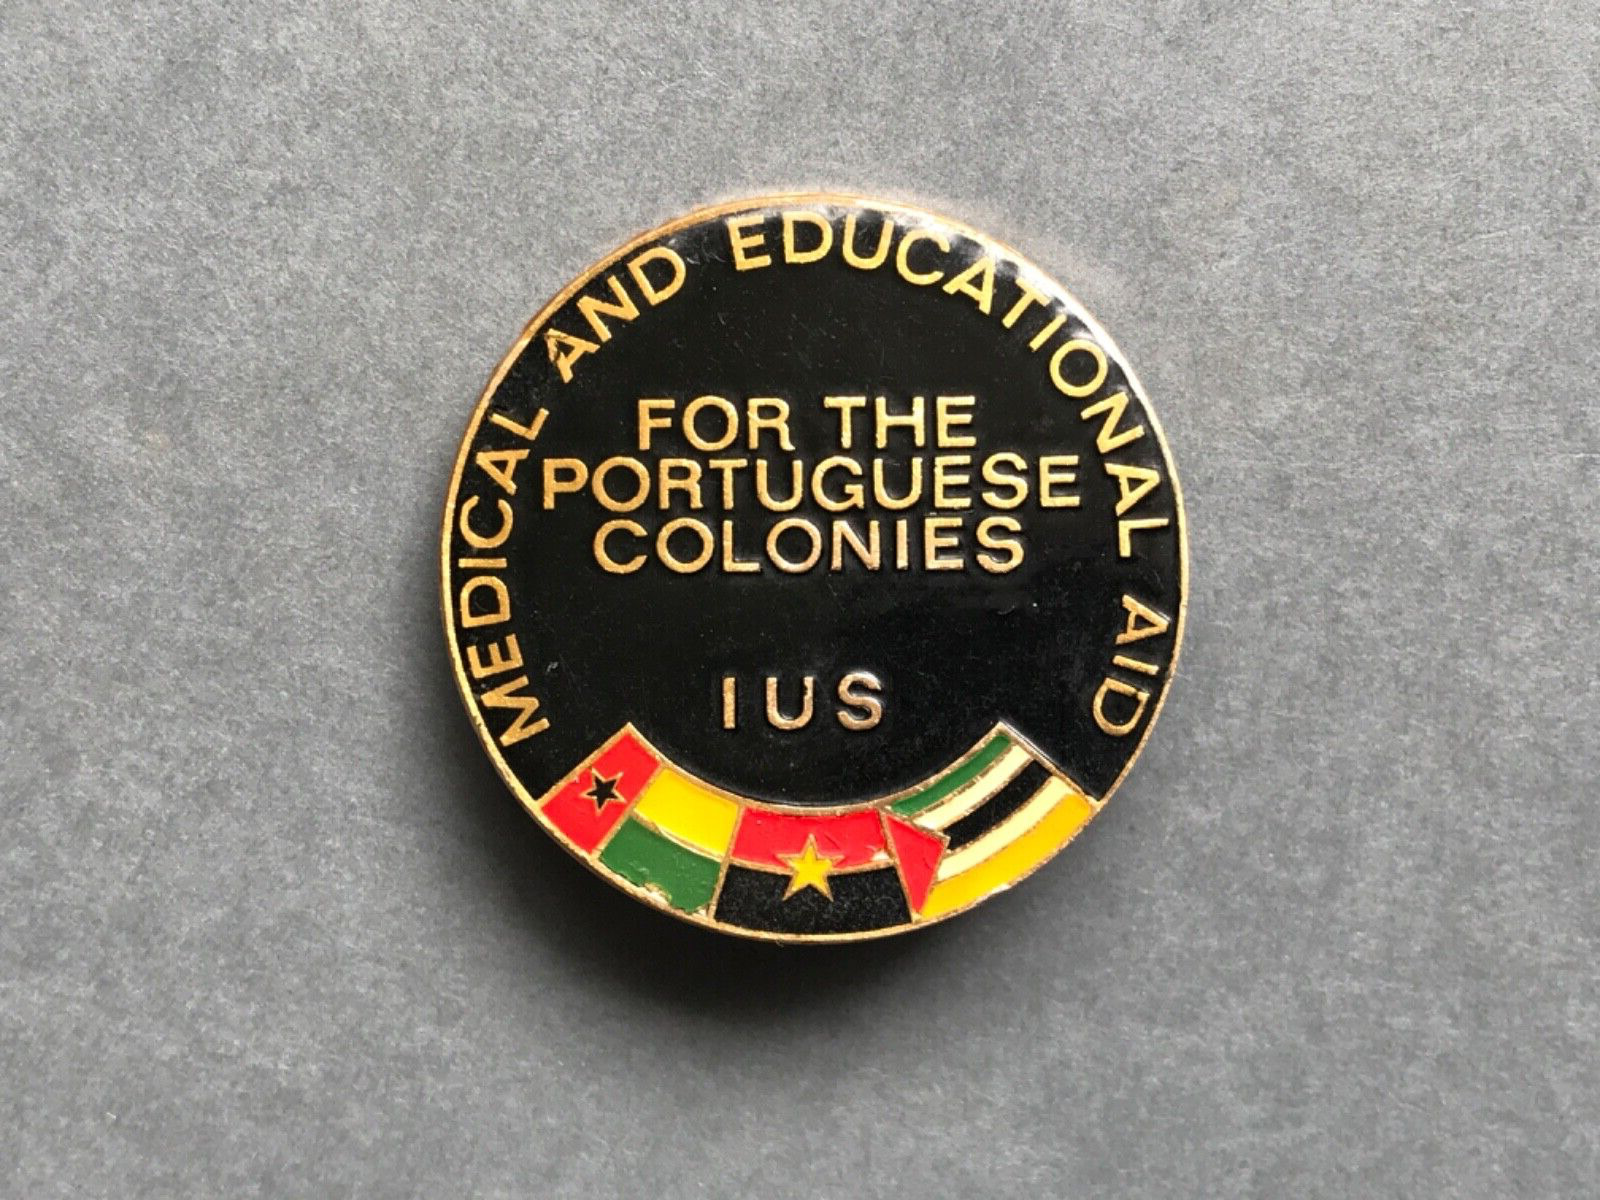 Vintage Pinback Button MEDICAL & EDUCATIONAL AID FOR THE PORTUGUESE COLONIES RRR